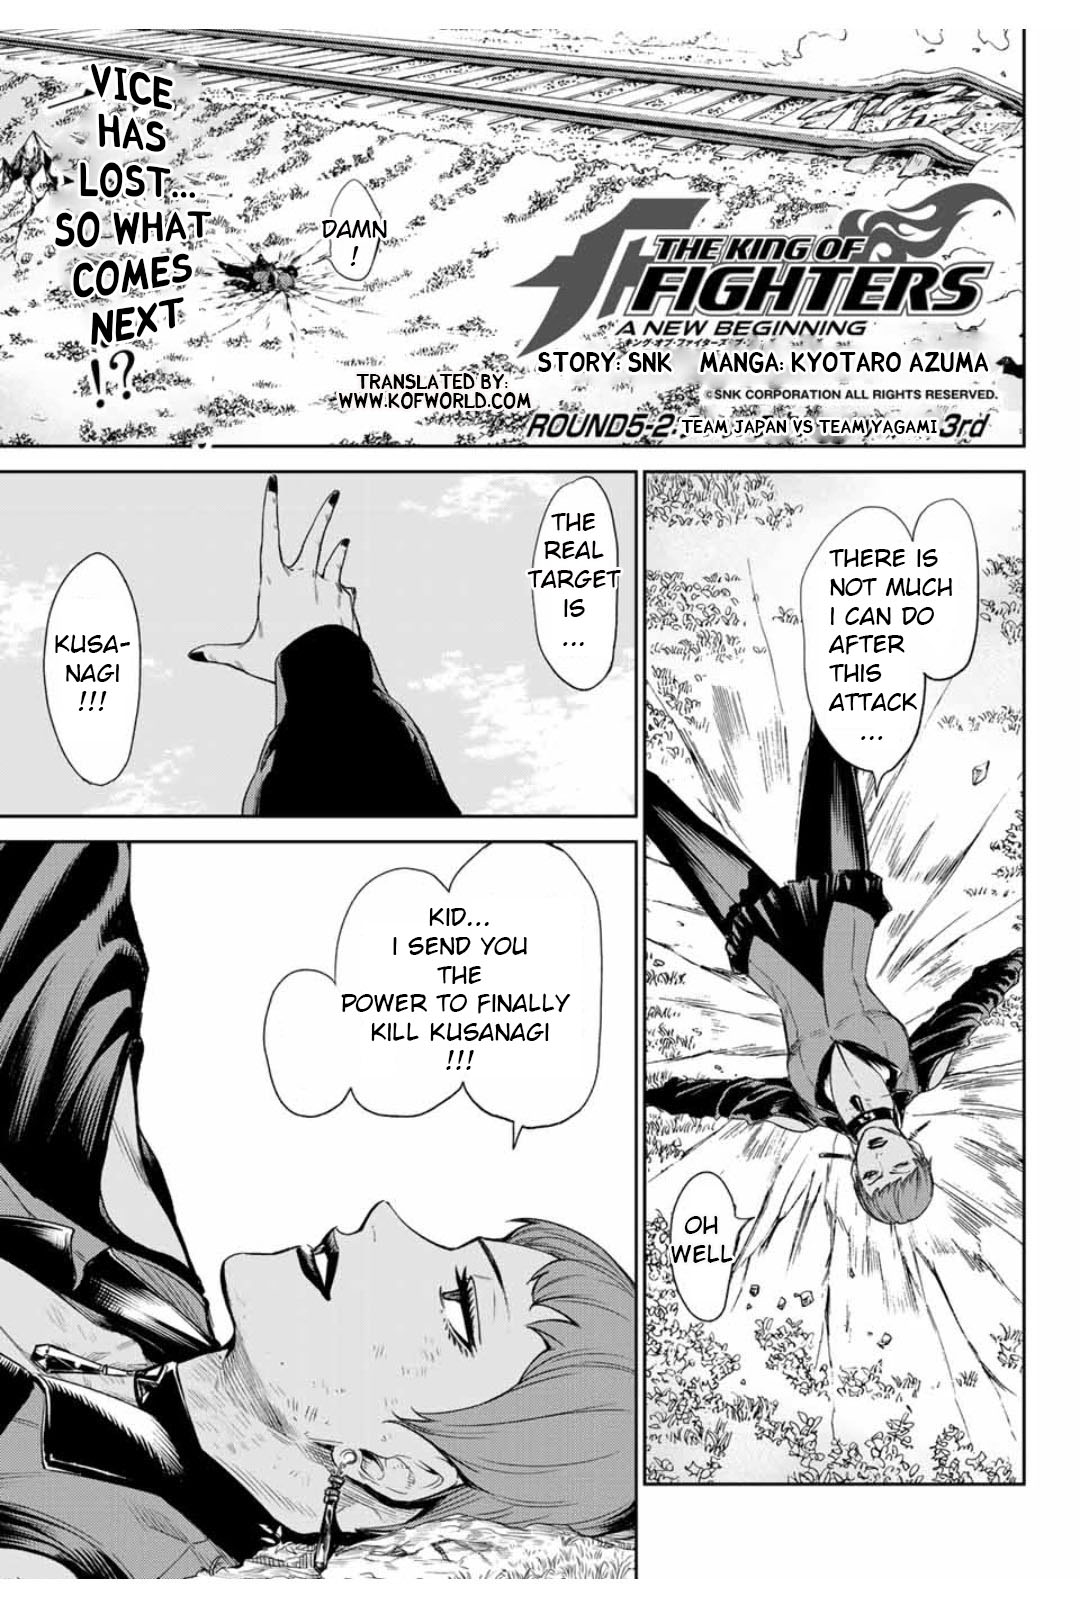 The King of Fighters: A New Beginning Vol. 1 Ch. 5.2 Team Japan vs Team Yagami 3rd